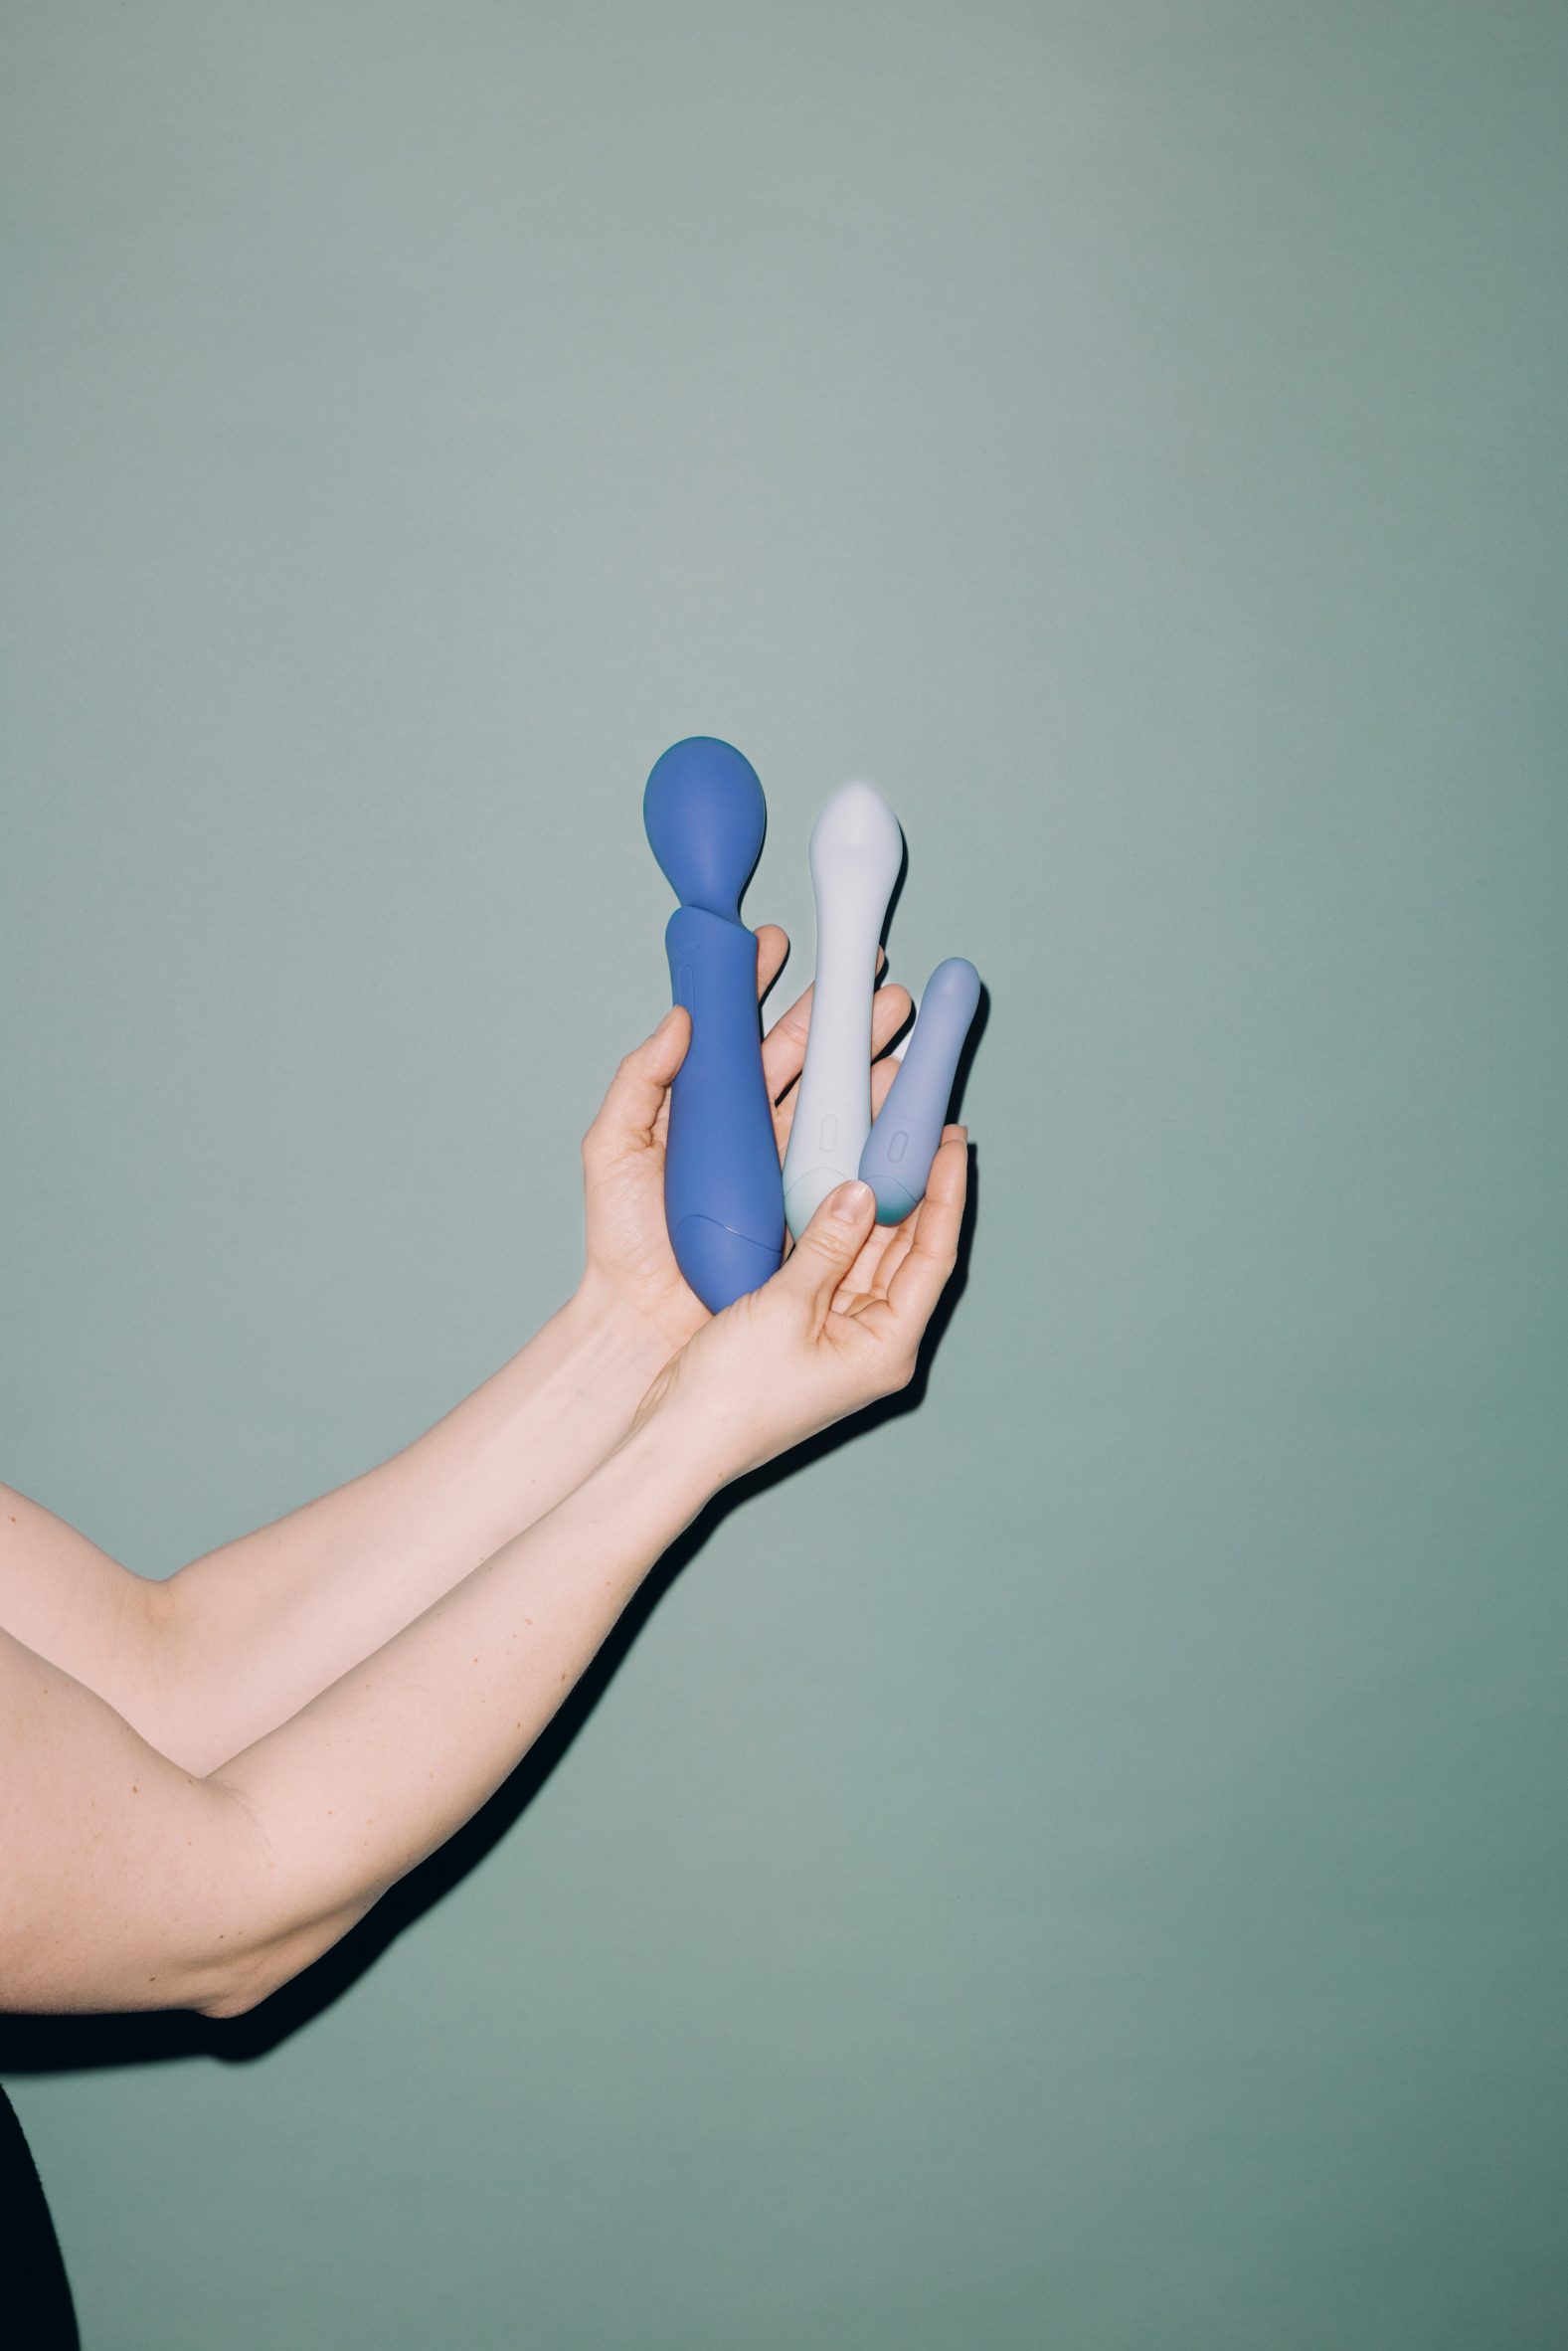 Ohhcean sex toys are made from recycled ocean plastic photo